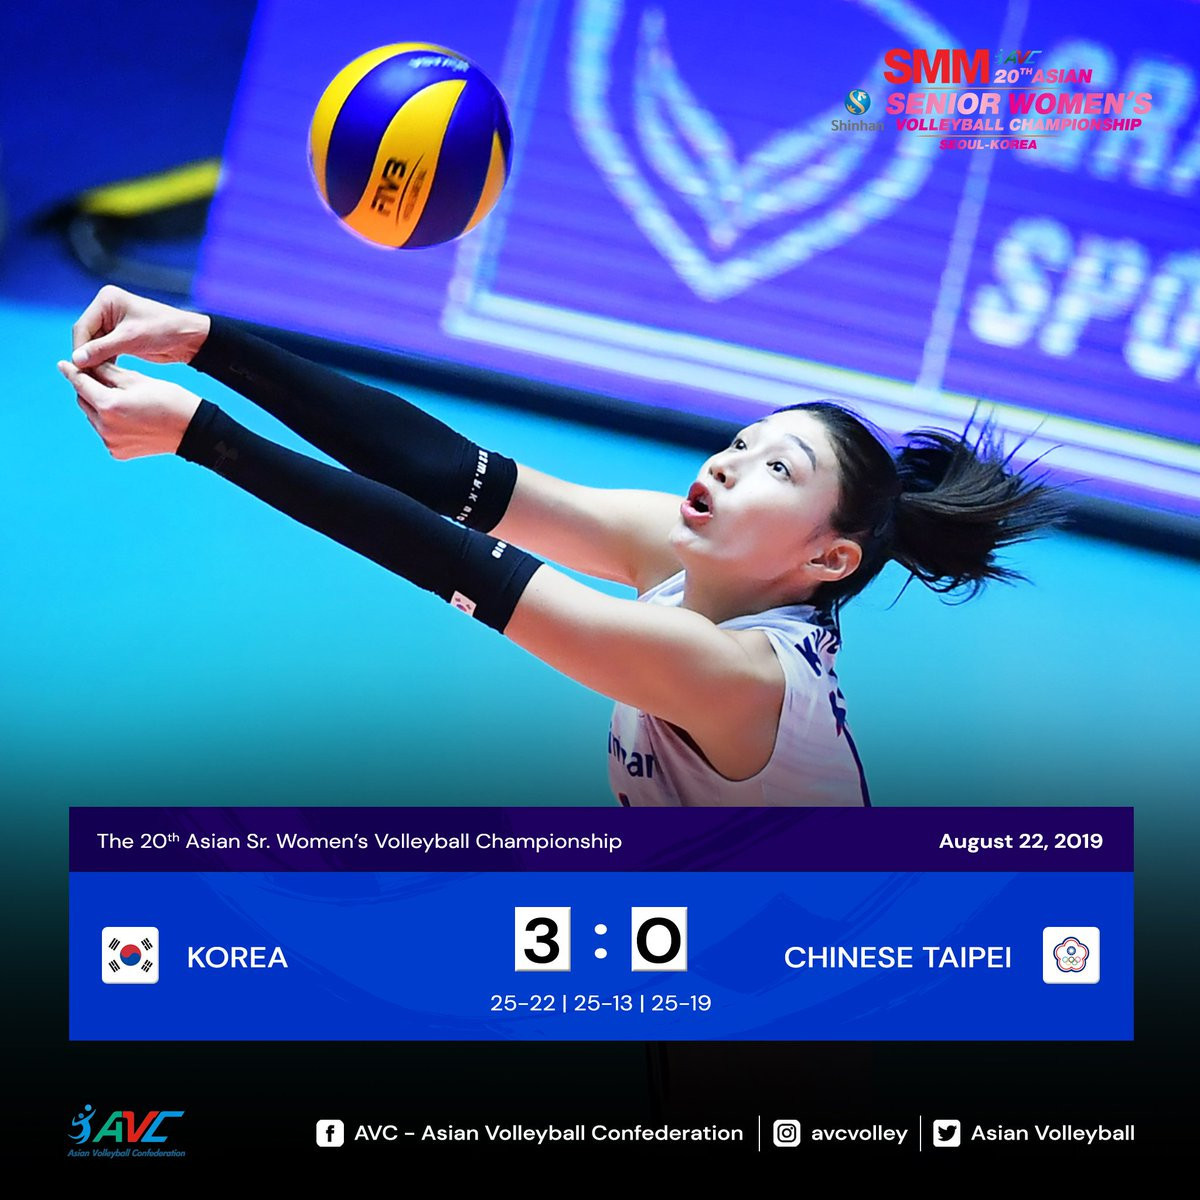 Hosts South Korea were too strong for Chinese Taipei at the Asian Women's Volleyball Championship in Seoul ©Asian Volleyball/Twitter